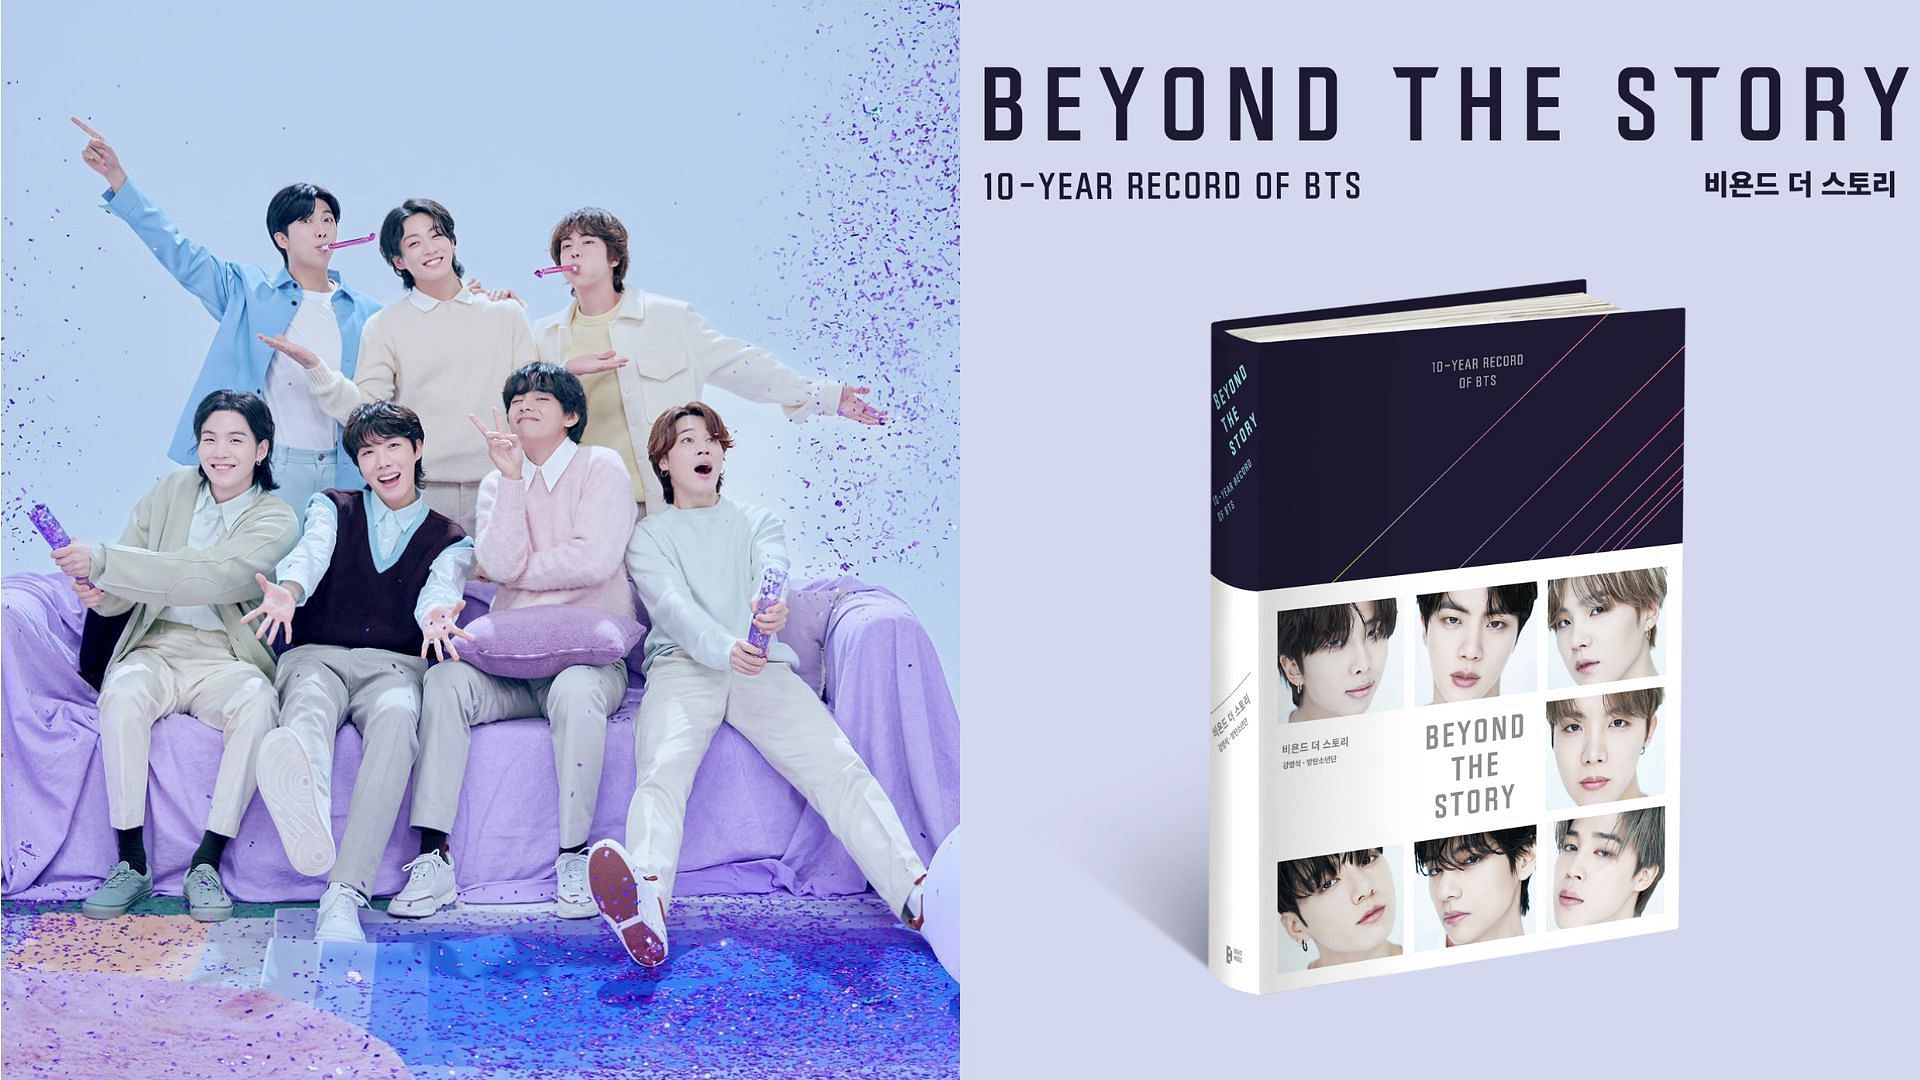 BTS Beyond the Story book: What's it about, chapters, pre-orders